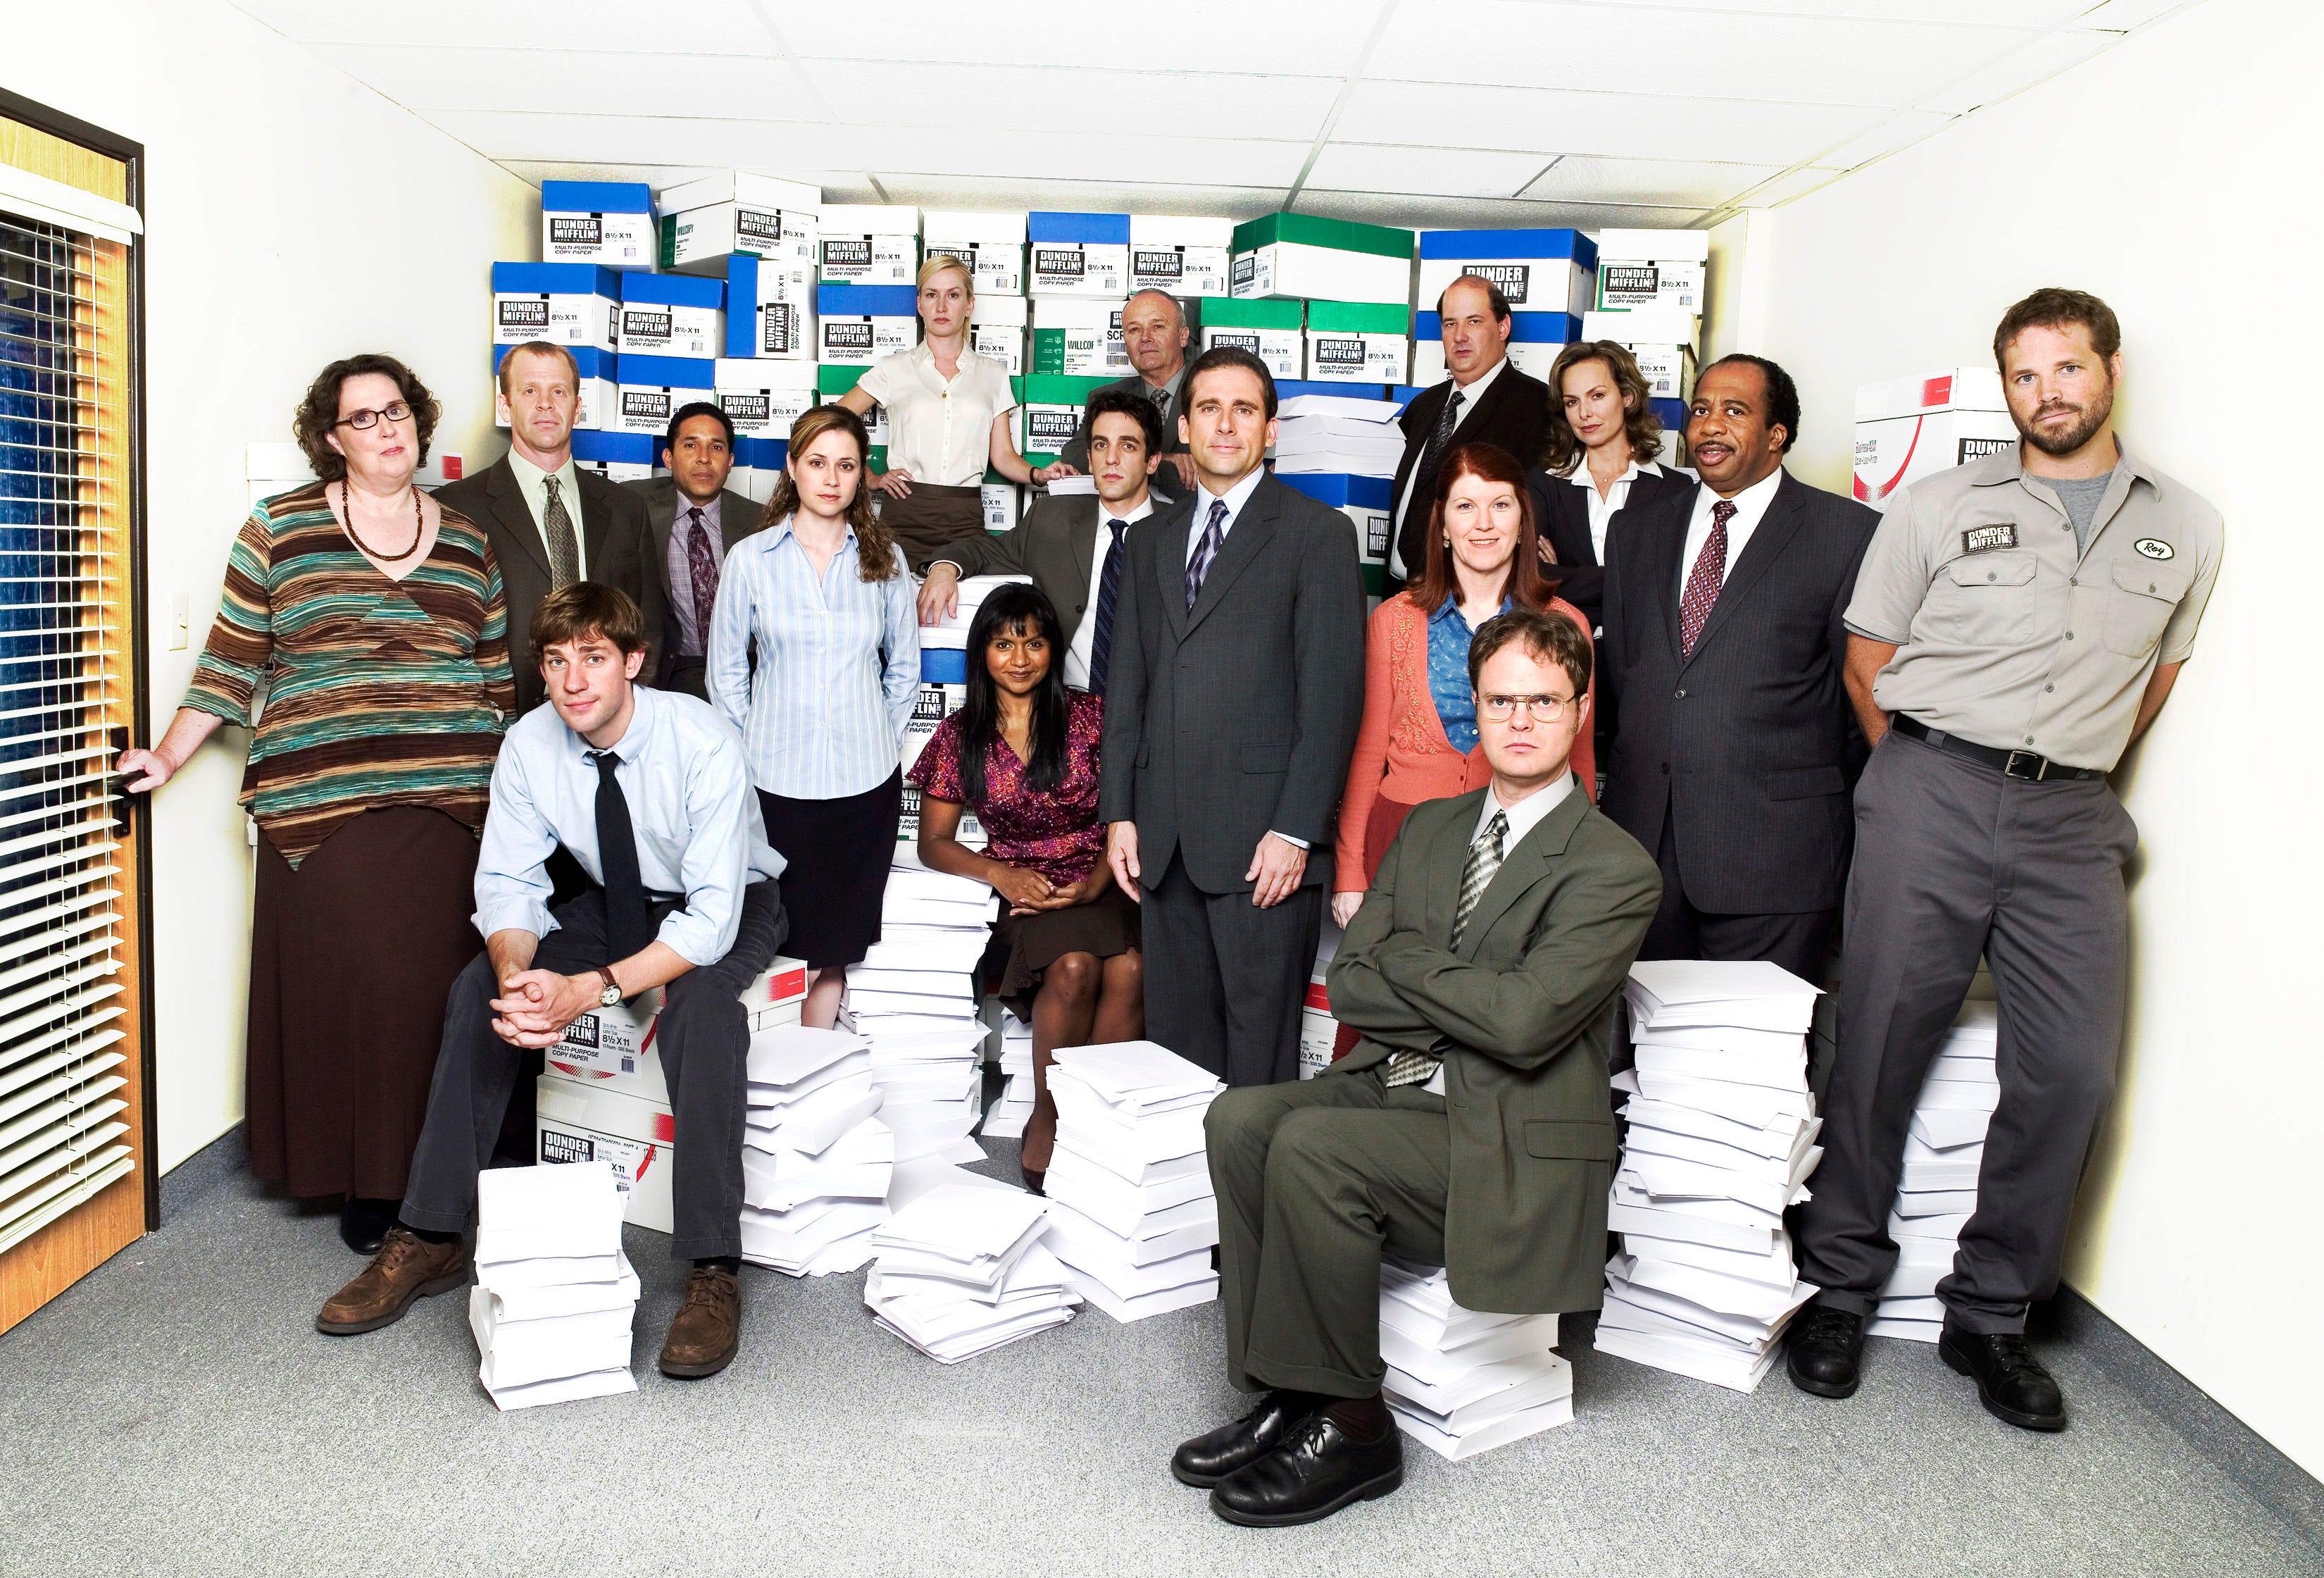 The Office' 15th anniversary: How it changed pop culture